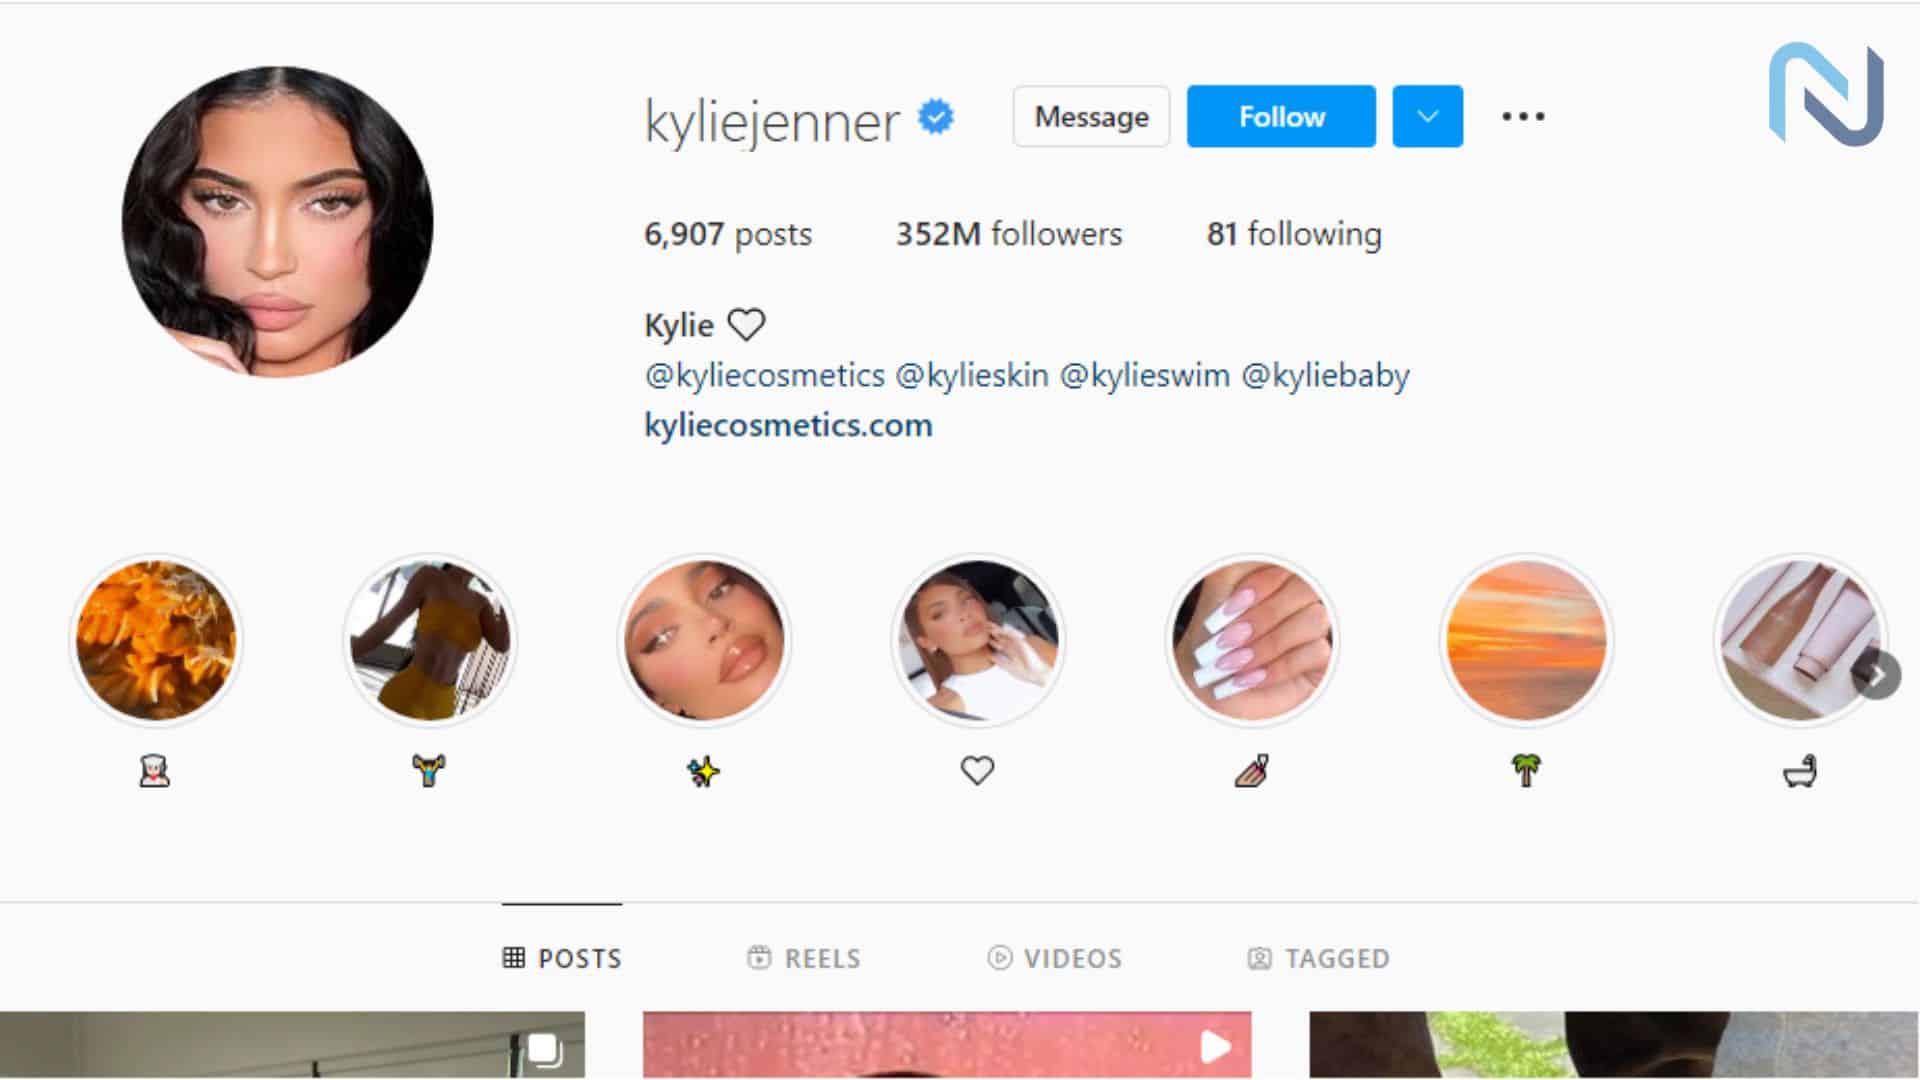 Kylie Jenner Most Followed Instagram Account